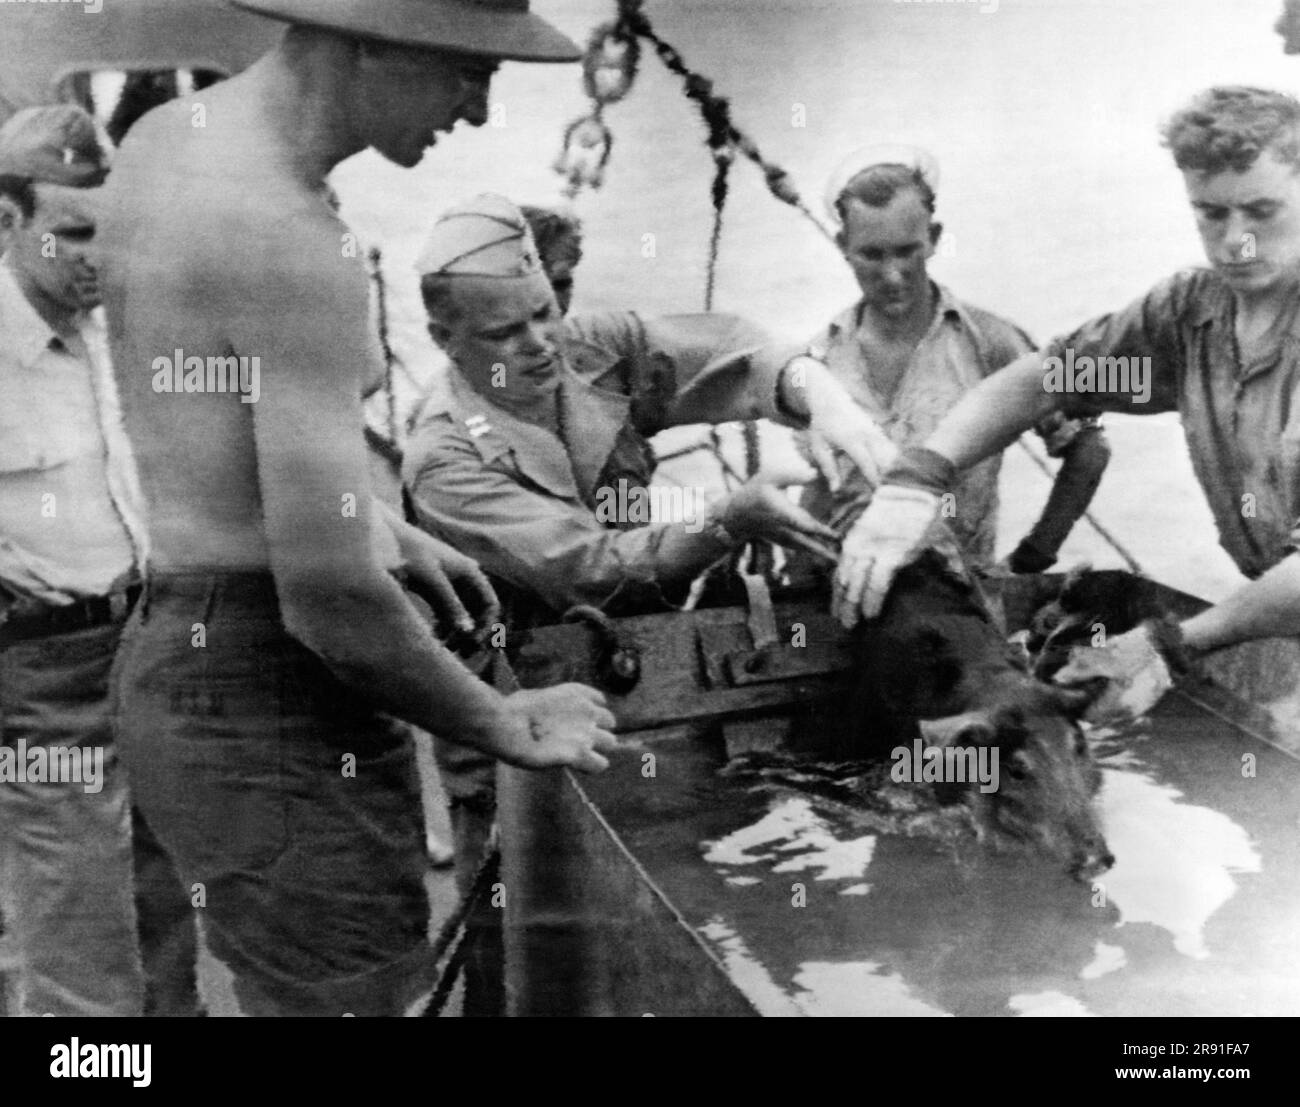 Bikini Atoll, Marshall Islands,  July 3, 1946 An Army veterinarian on the USS Mt Mckinley supervises a Calgon bath for pigs to remove all clinging particles of radiation as they are taken off of target ships after the atomic bomb explosion. Stock Photo